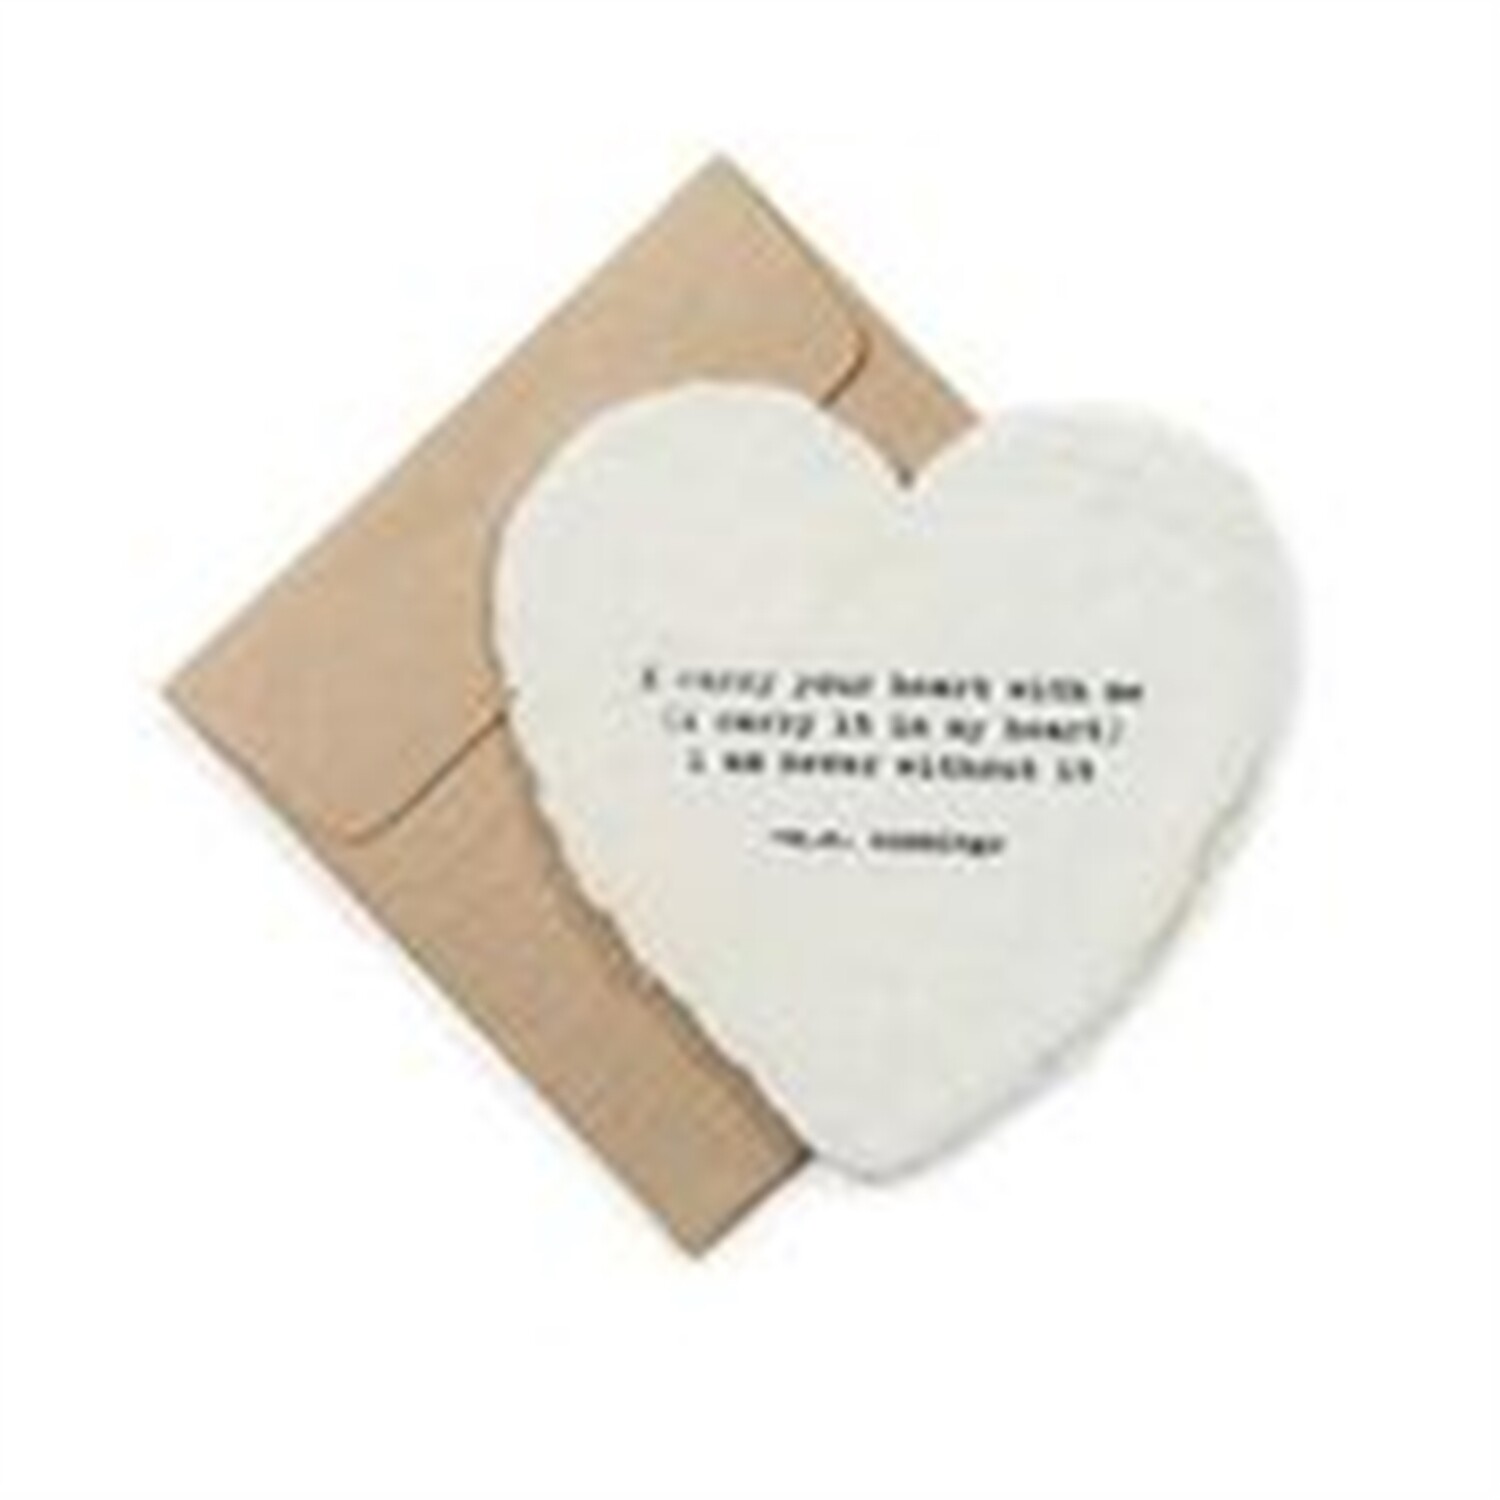 Mini Heart Shaped Card & Envelope-i carry your heart with me